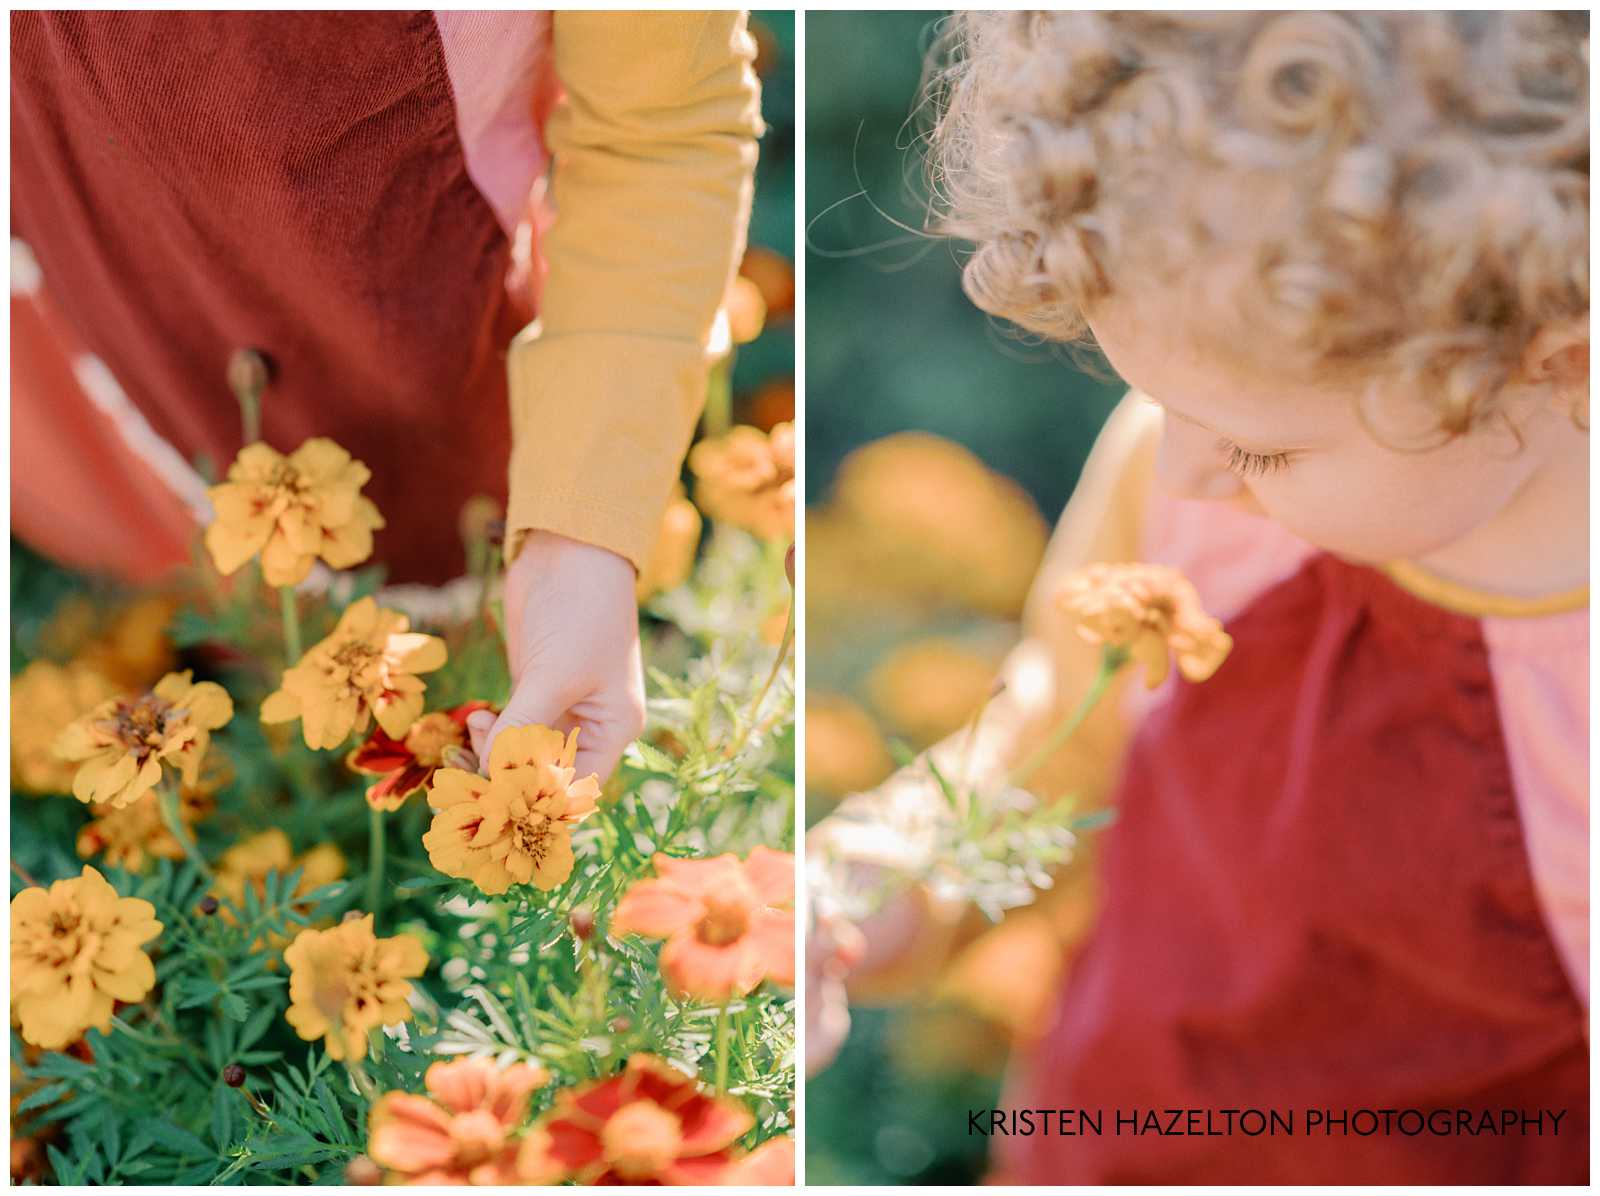 Little girl in red and pink and yellow dress picking marigold flowers.